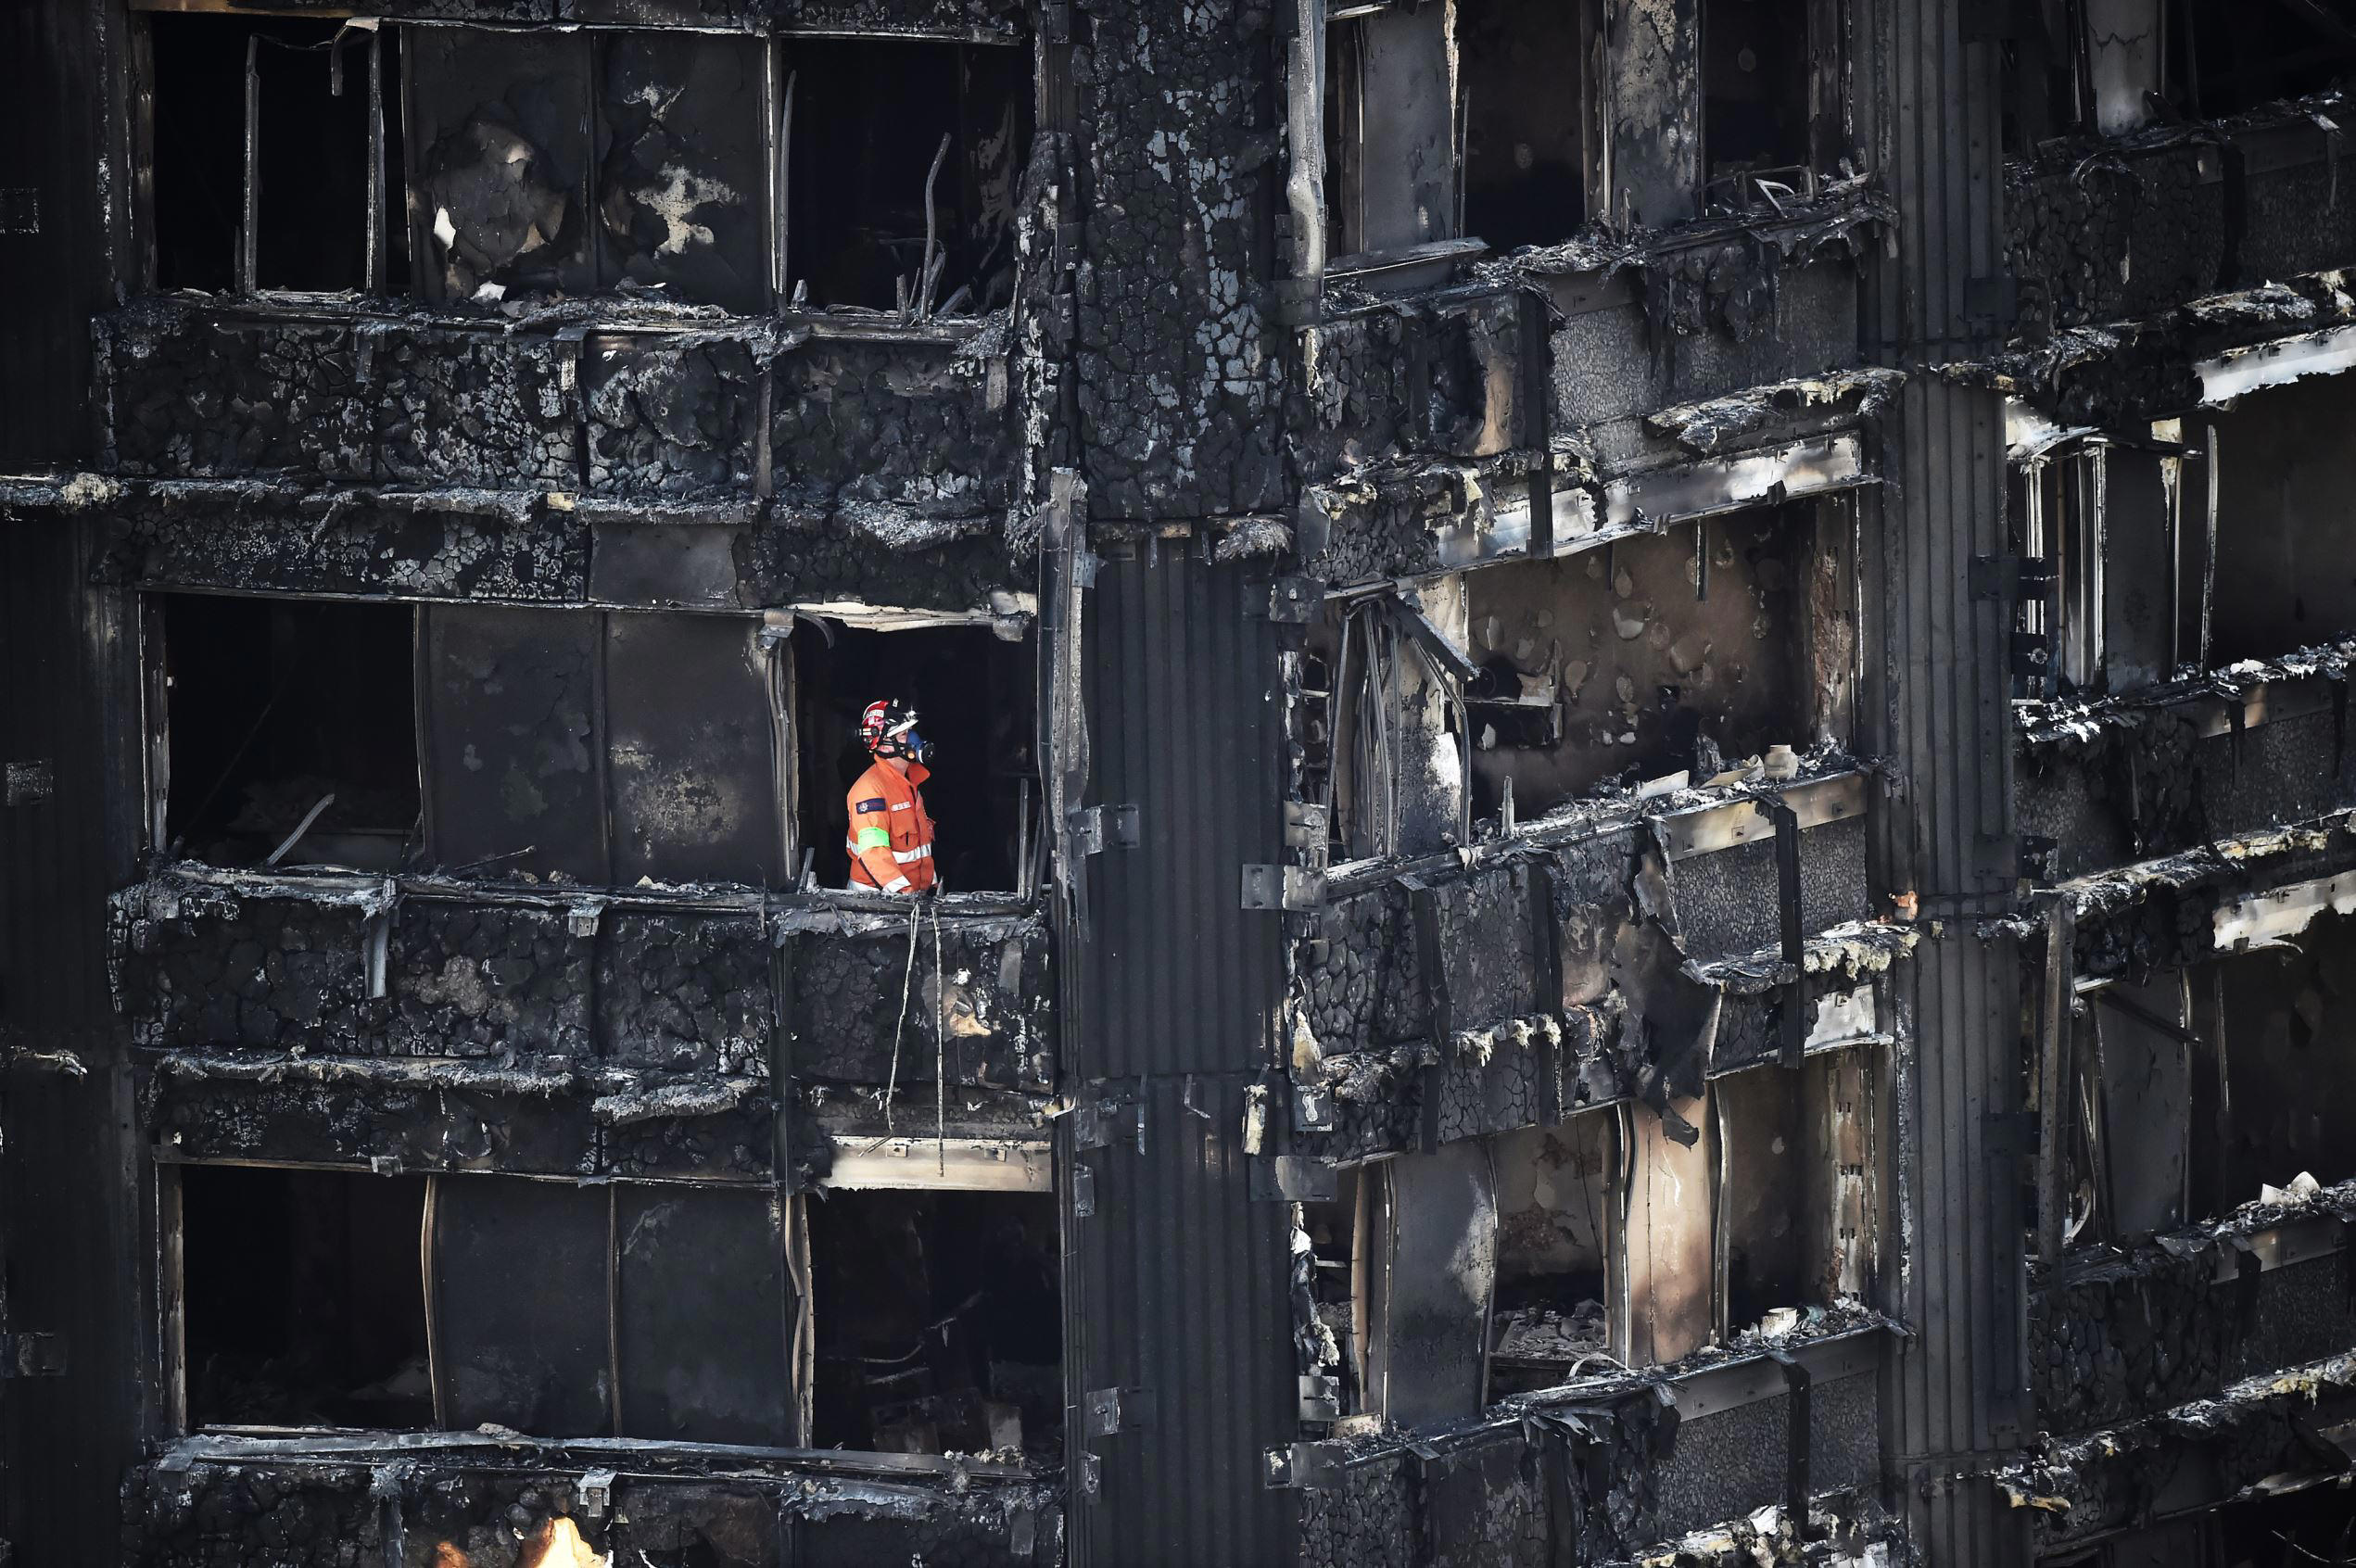 Slide 1 of 101: A member of the emergency services works inside the Grenfell apartment tower block in North Kensington, London, Britain, June 17, 2017. REUTERS/Hannah McKay